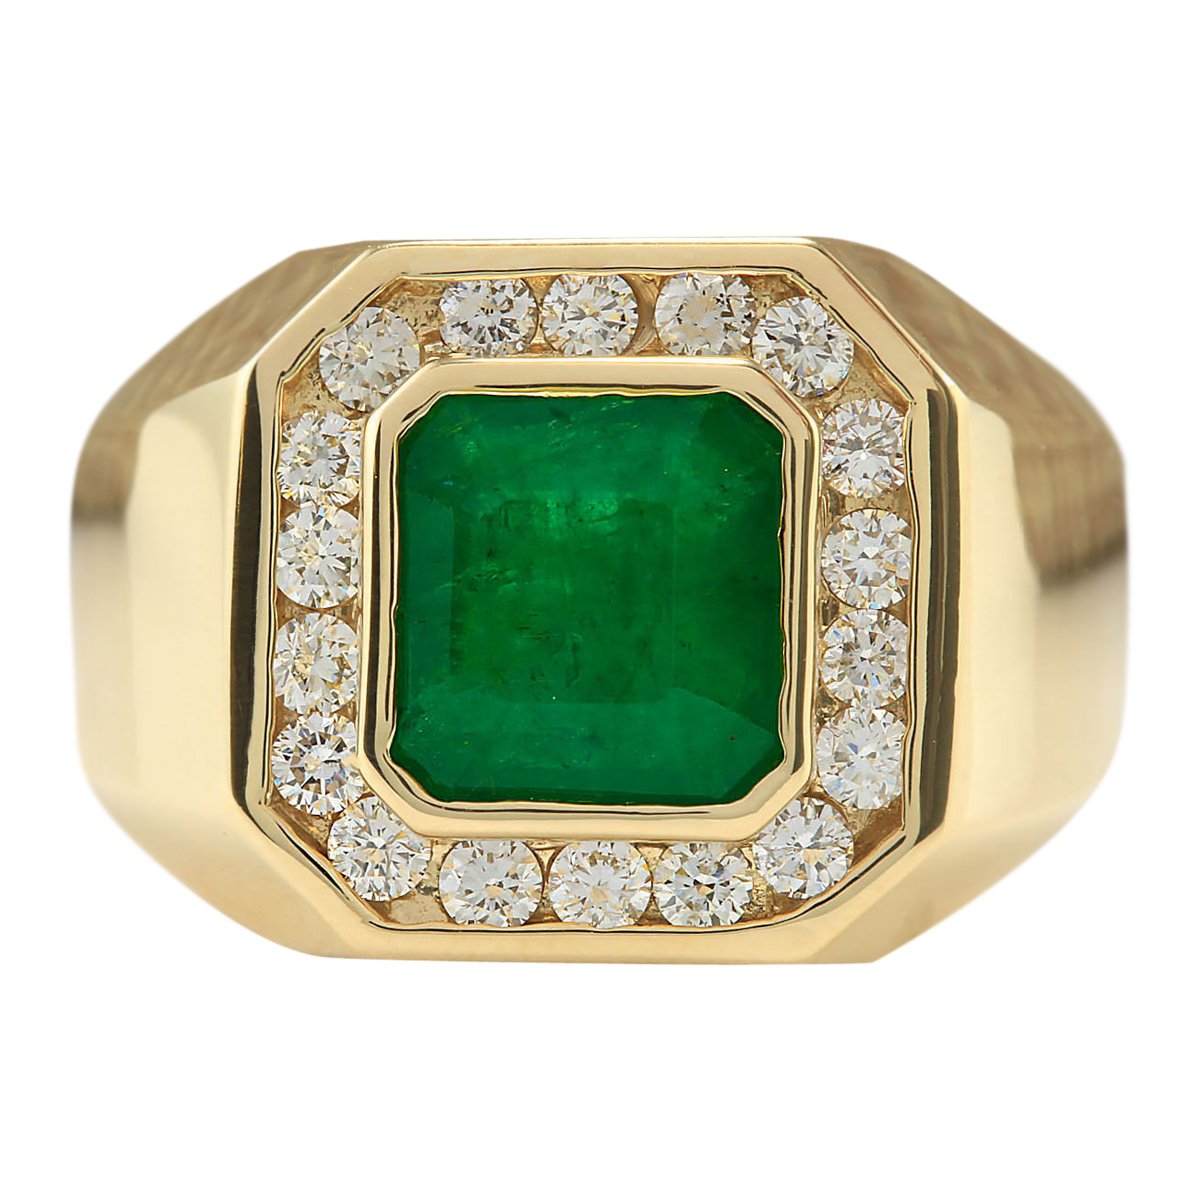 4.26 Carat Natural Green Emerald and Diamond (F-G Color, VS1-VS2 Clarity) 14K Yellow Gold Luxury Statement Ring for Men Exclusively Handcrafted in USA